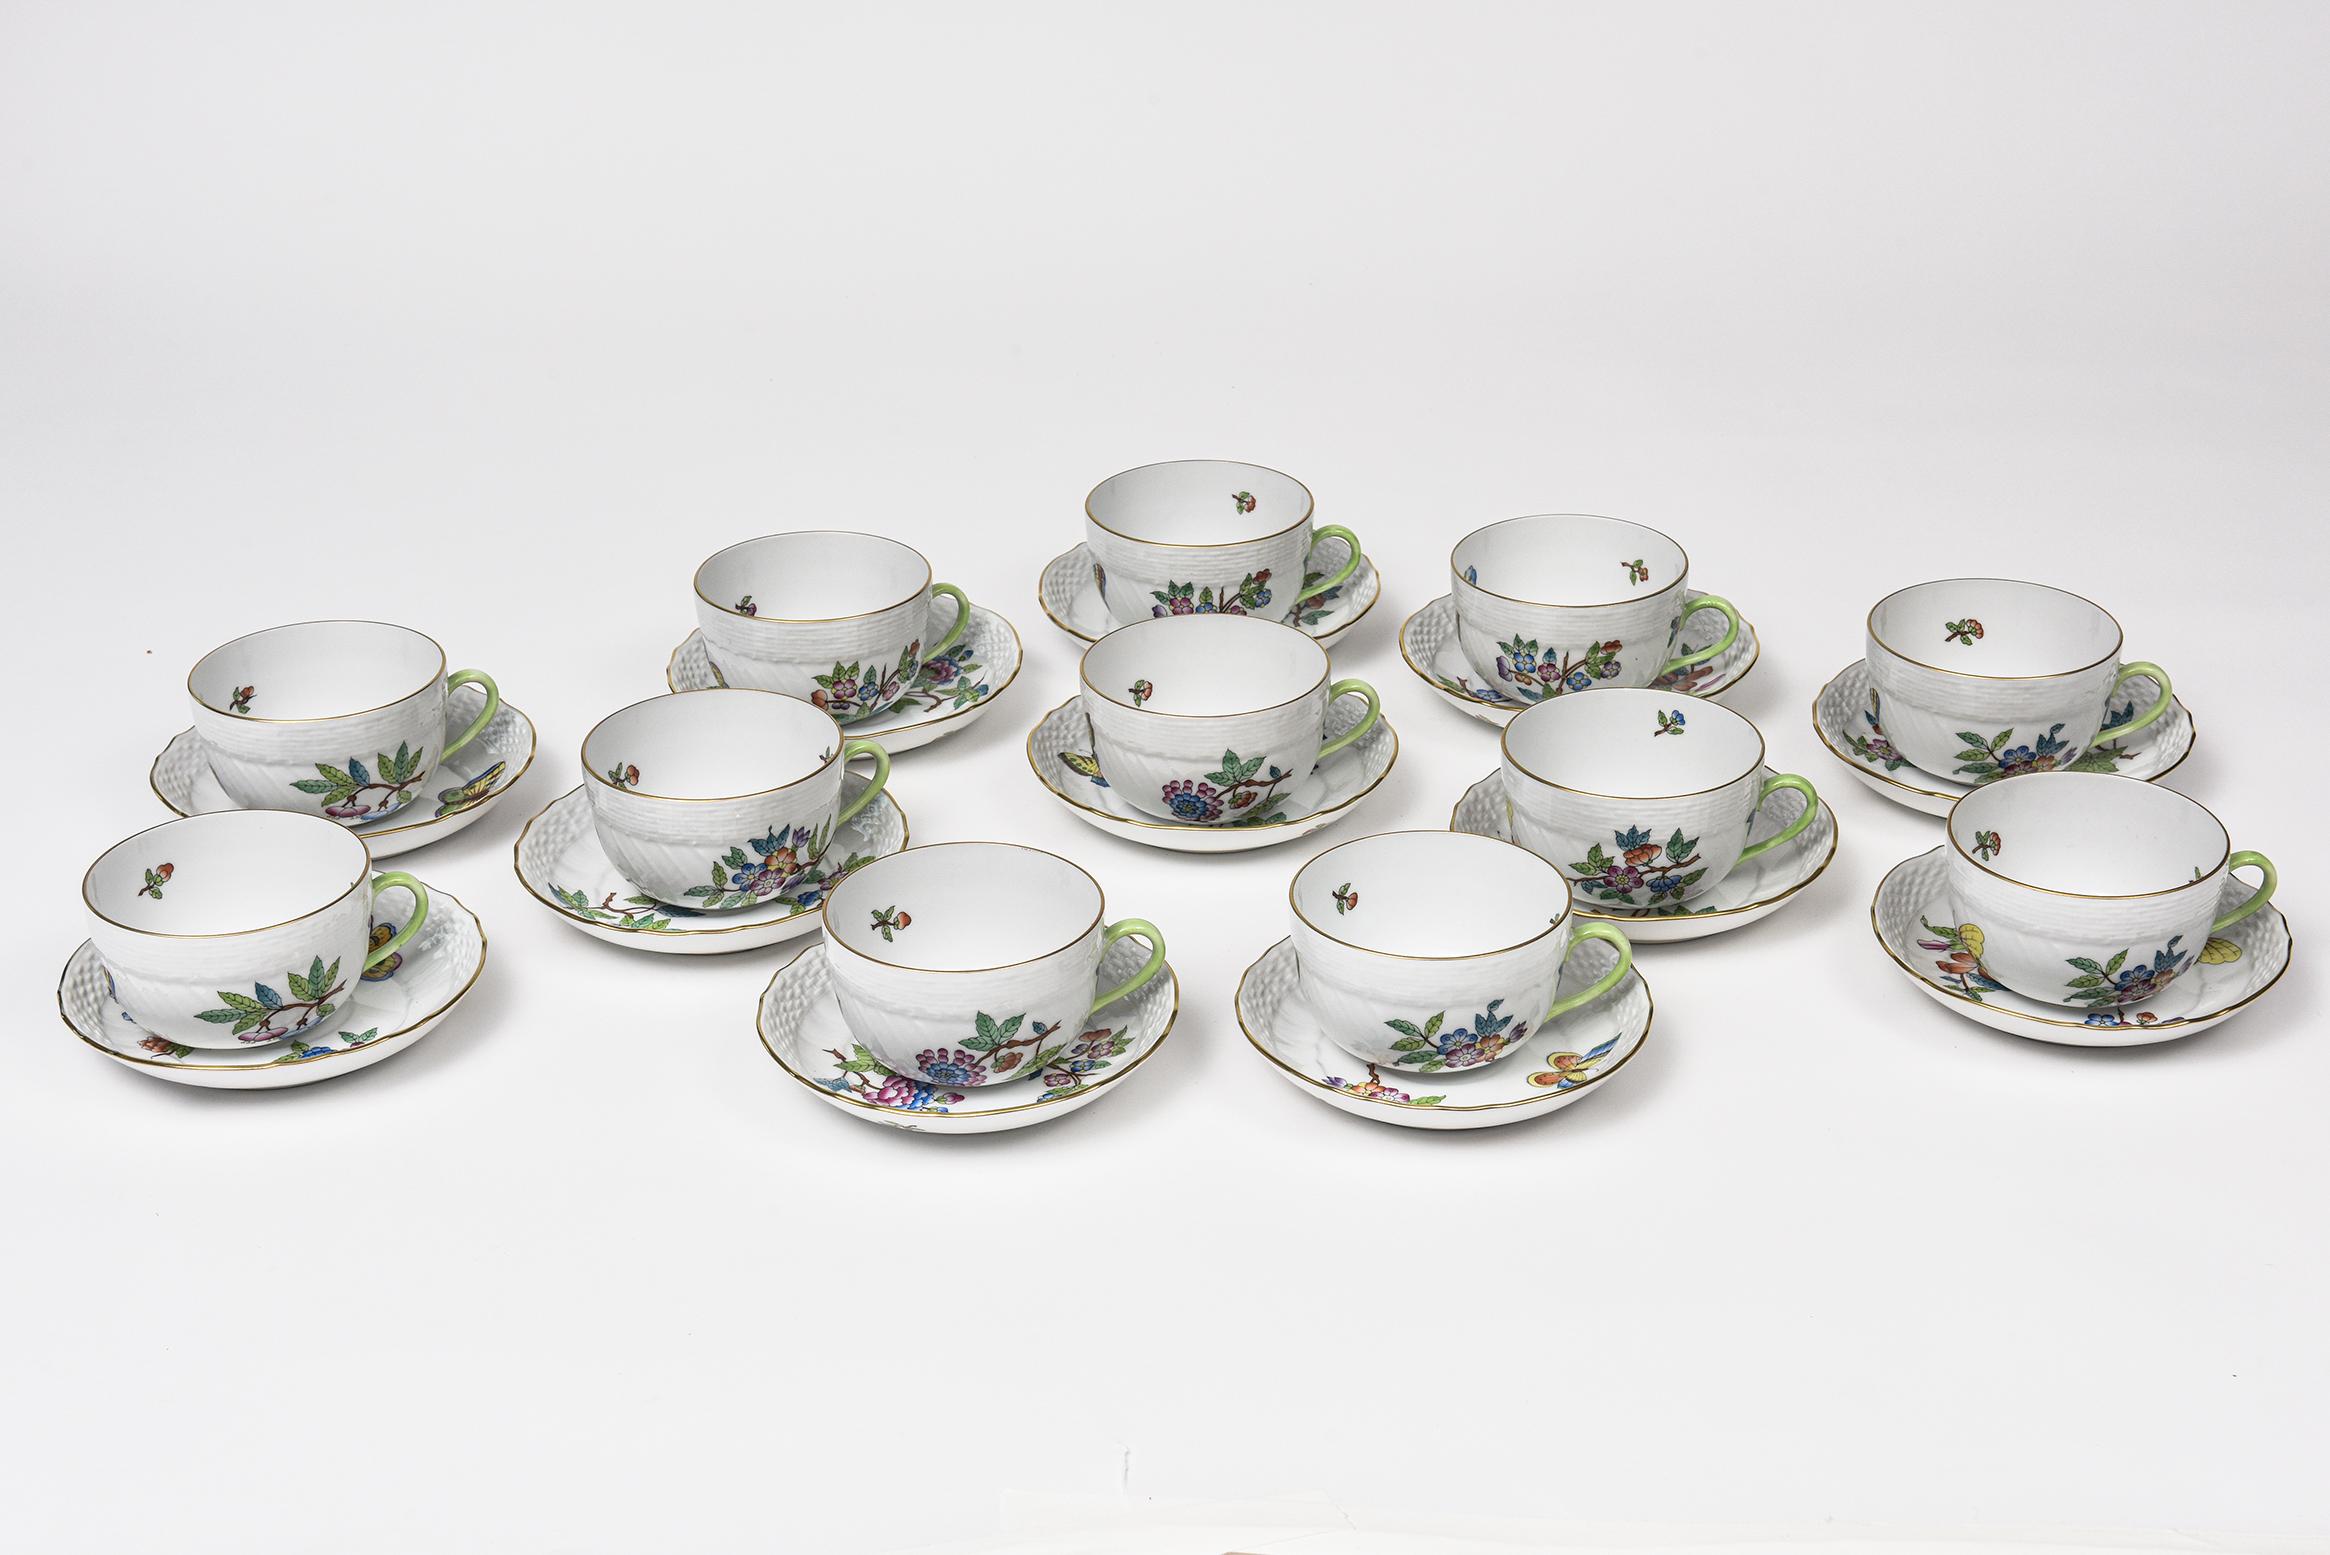 Herend Queen Victoria Older Version Dinner China Set for 11 Plus '70 Pieces' For Sale 10